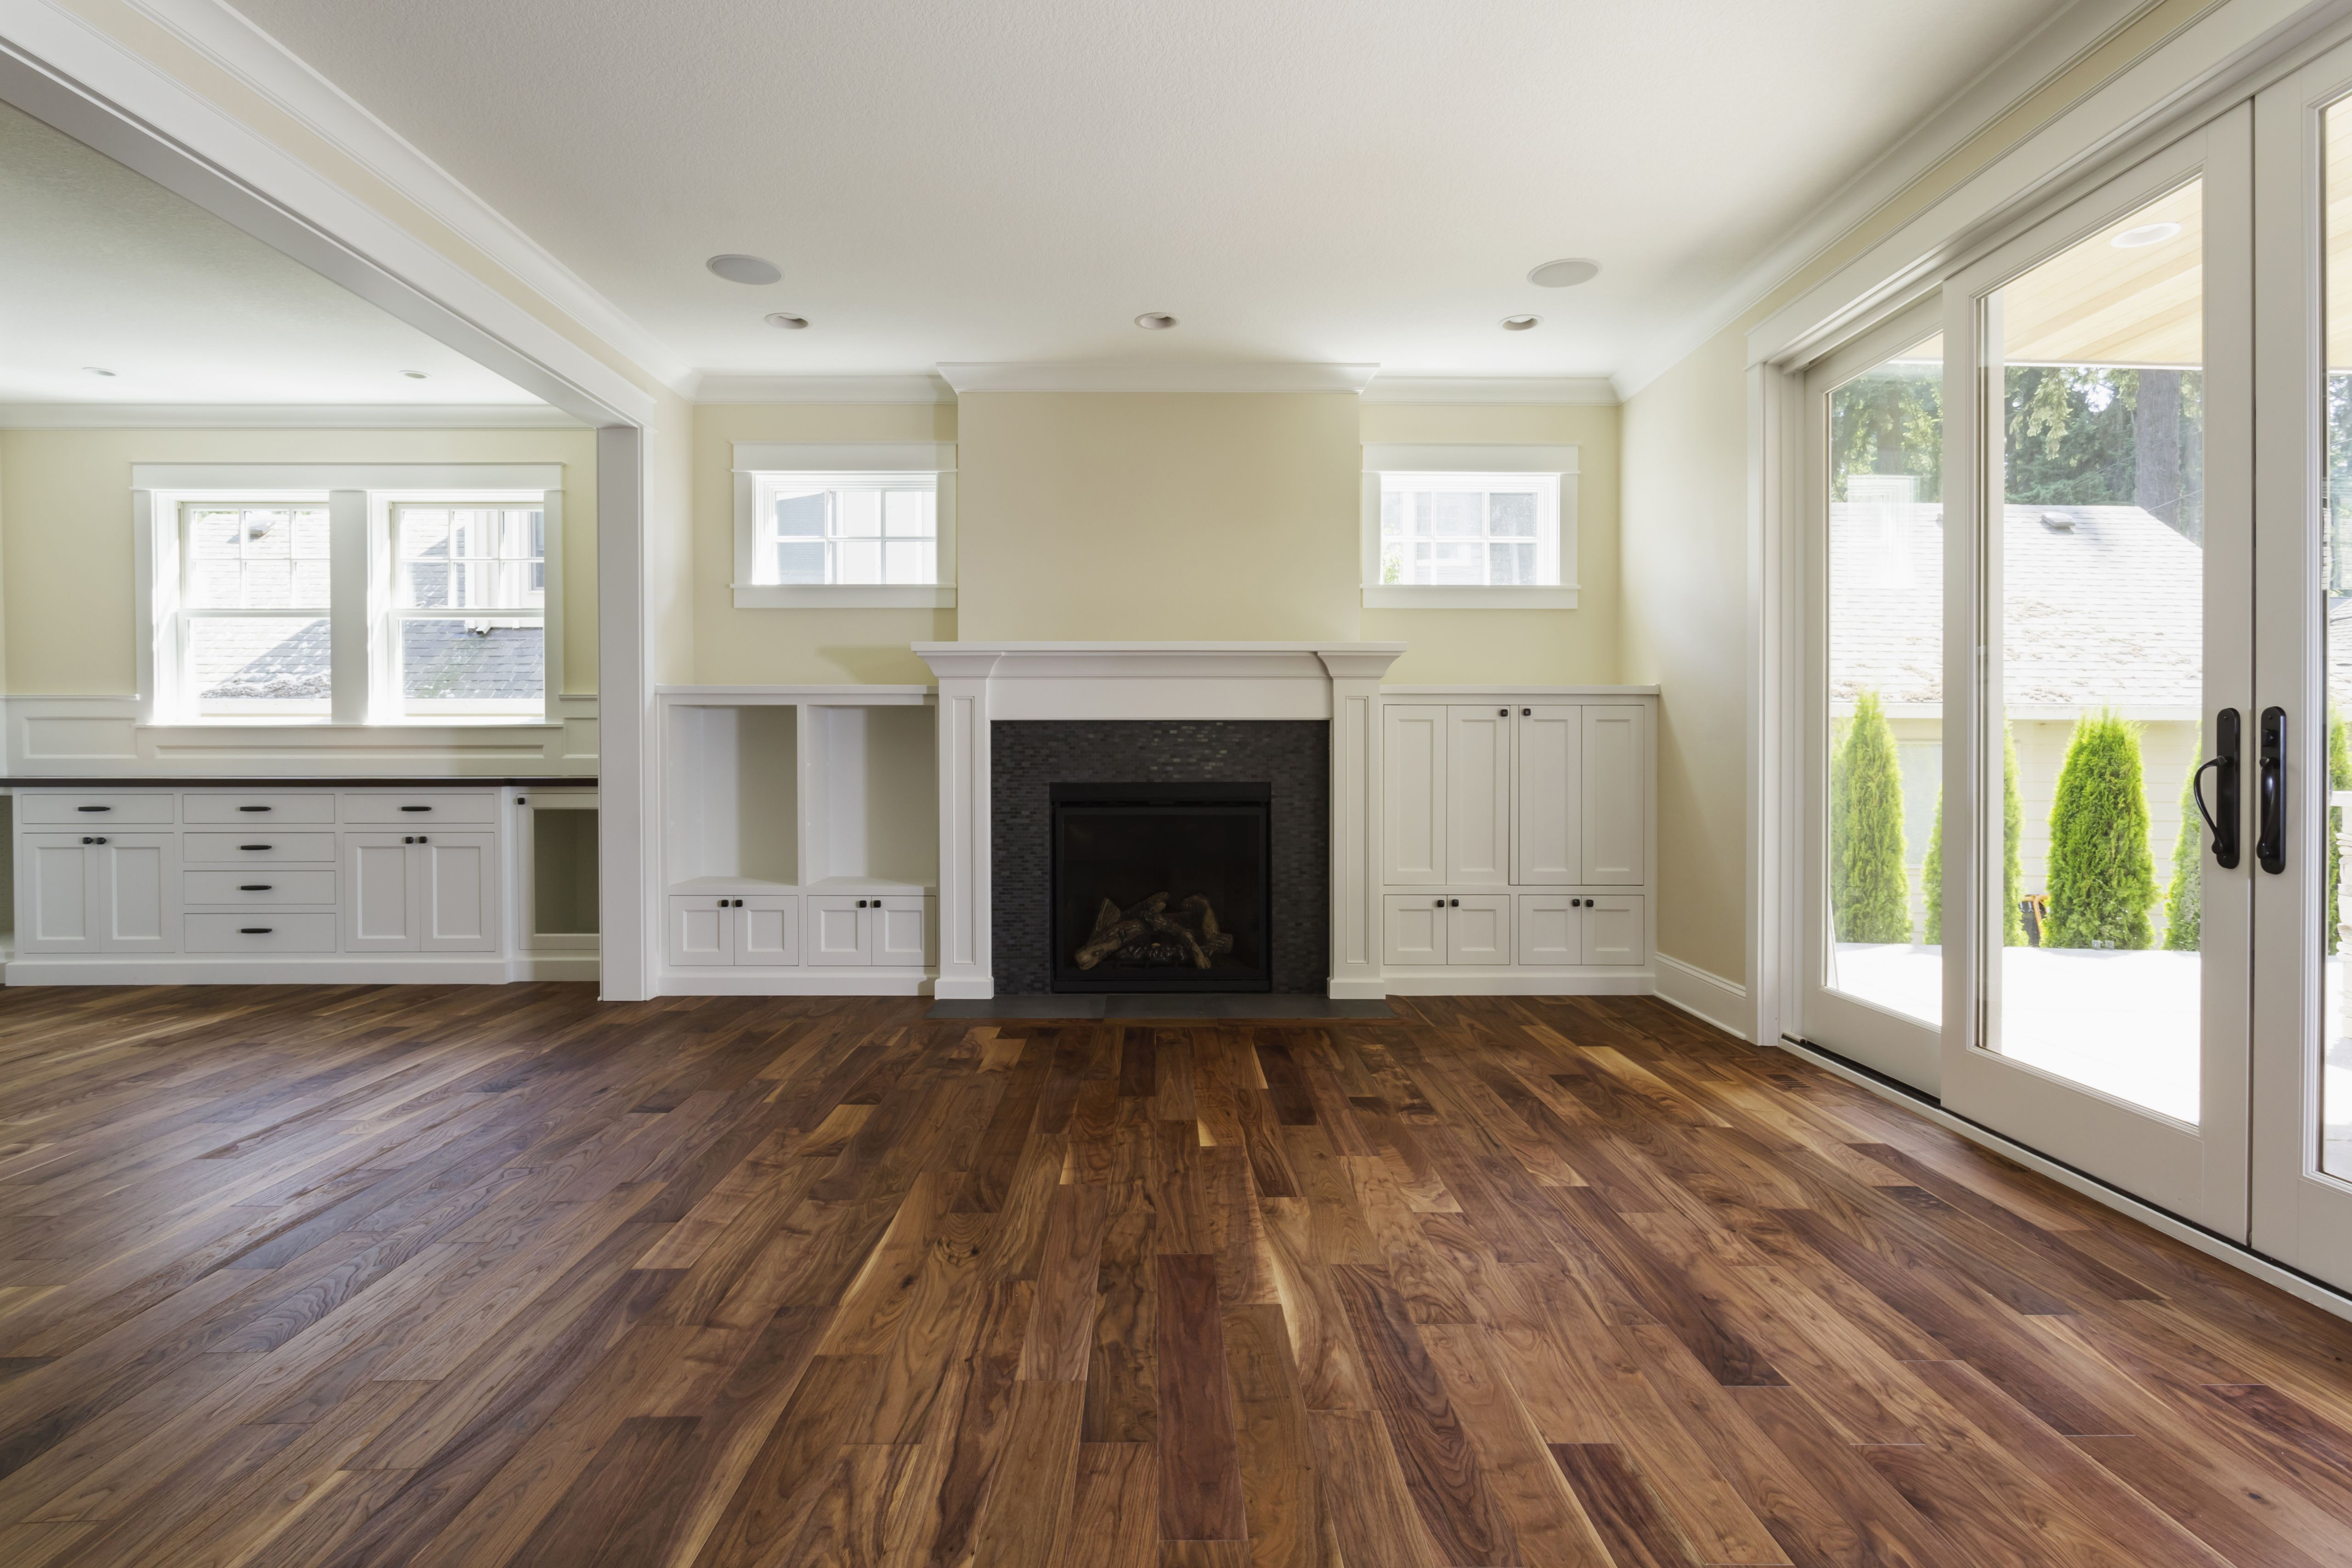 15 Recommended Hardwood Floor Epoxy Filler 2024 free download hardwood floor epoxy filler of the pros and cons of prefinished hardwood flooring with regard to fireplace and built in shelves in living room 482143011 57bef8e33df78cc16e035397